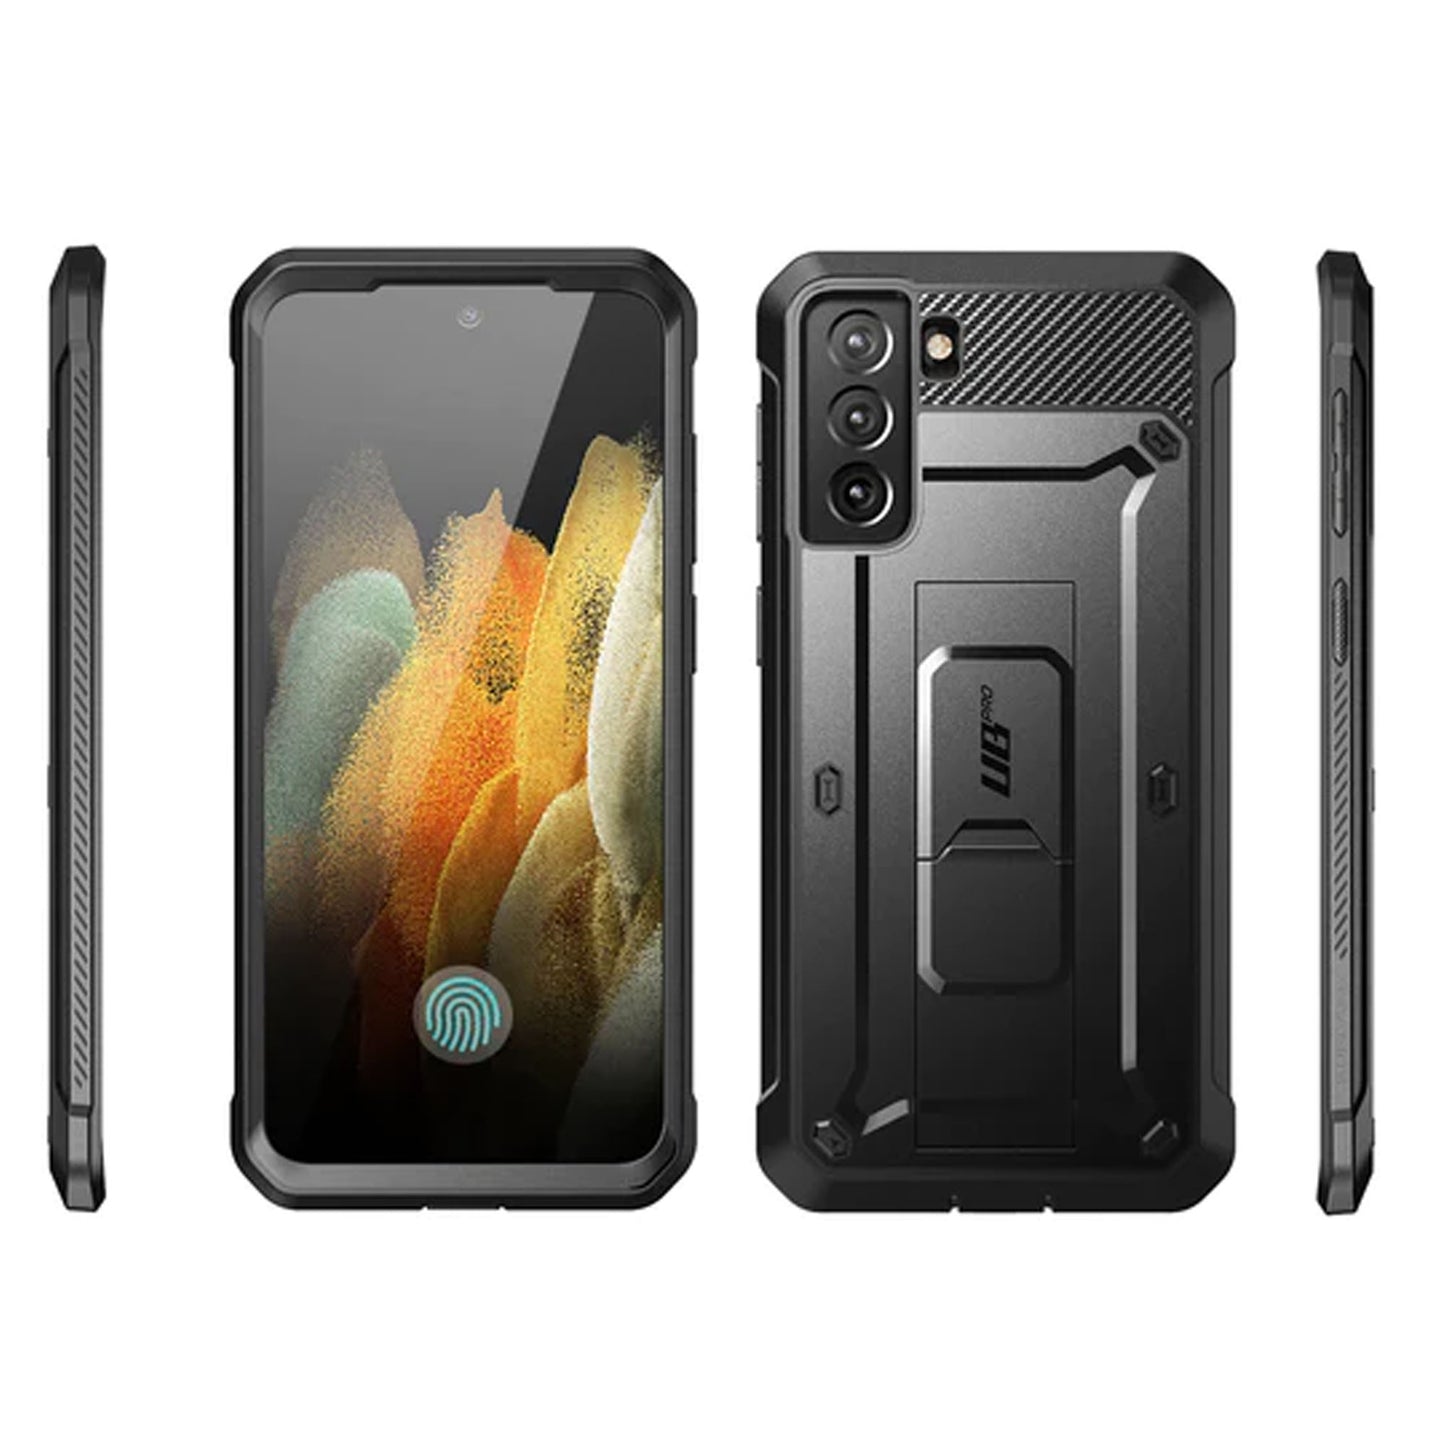 Supcase Unicorn Beetle Pro Rugged Case for Samsung Galaxy S21 FE with Built-in Screen Protector - Black (Barcode: 843439113374 )